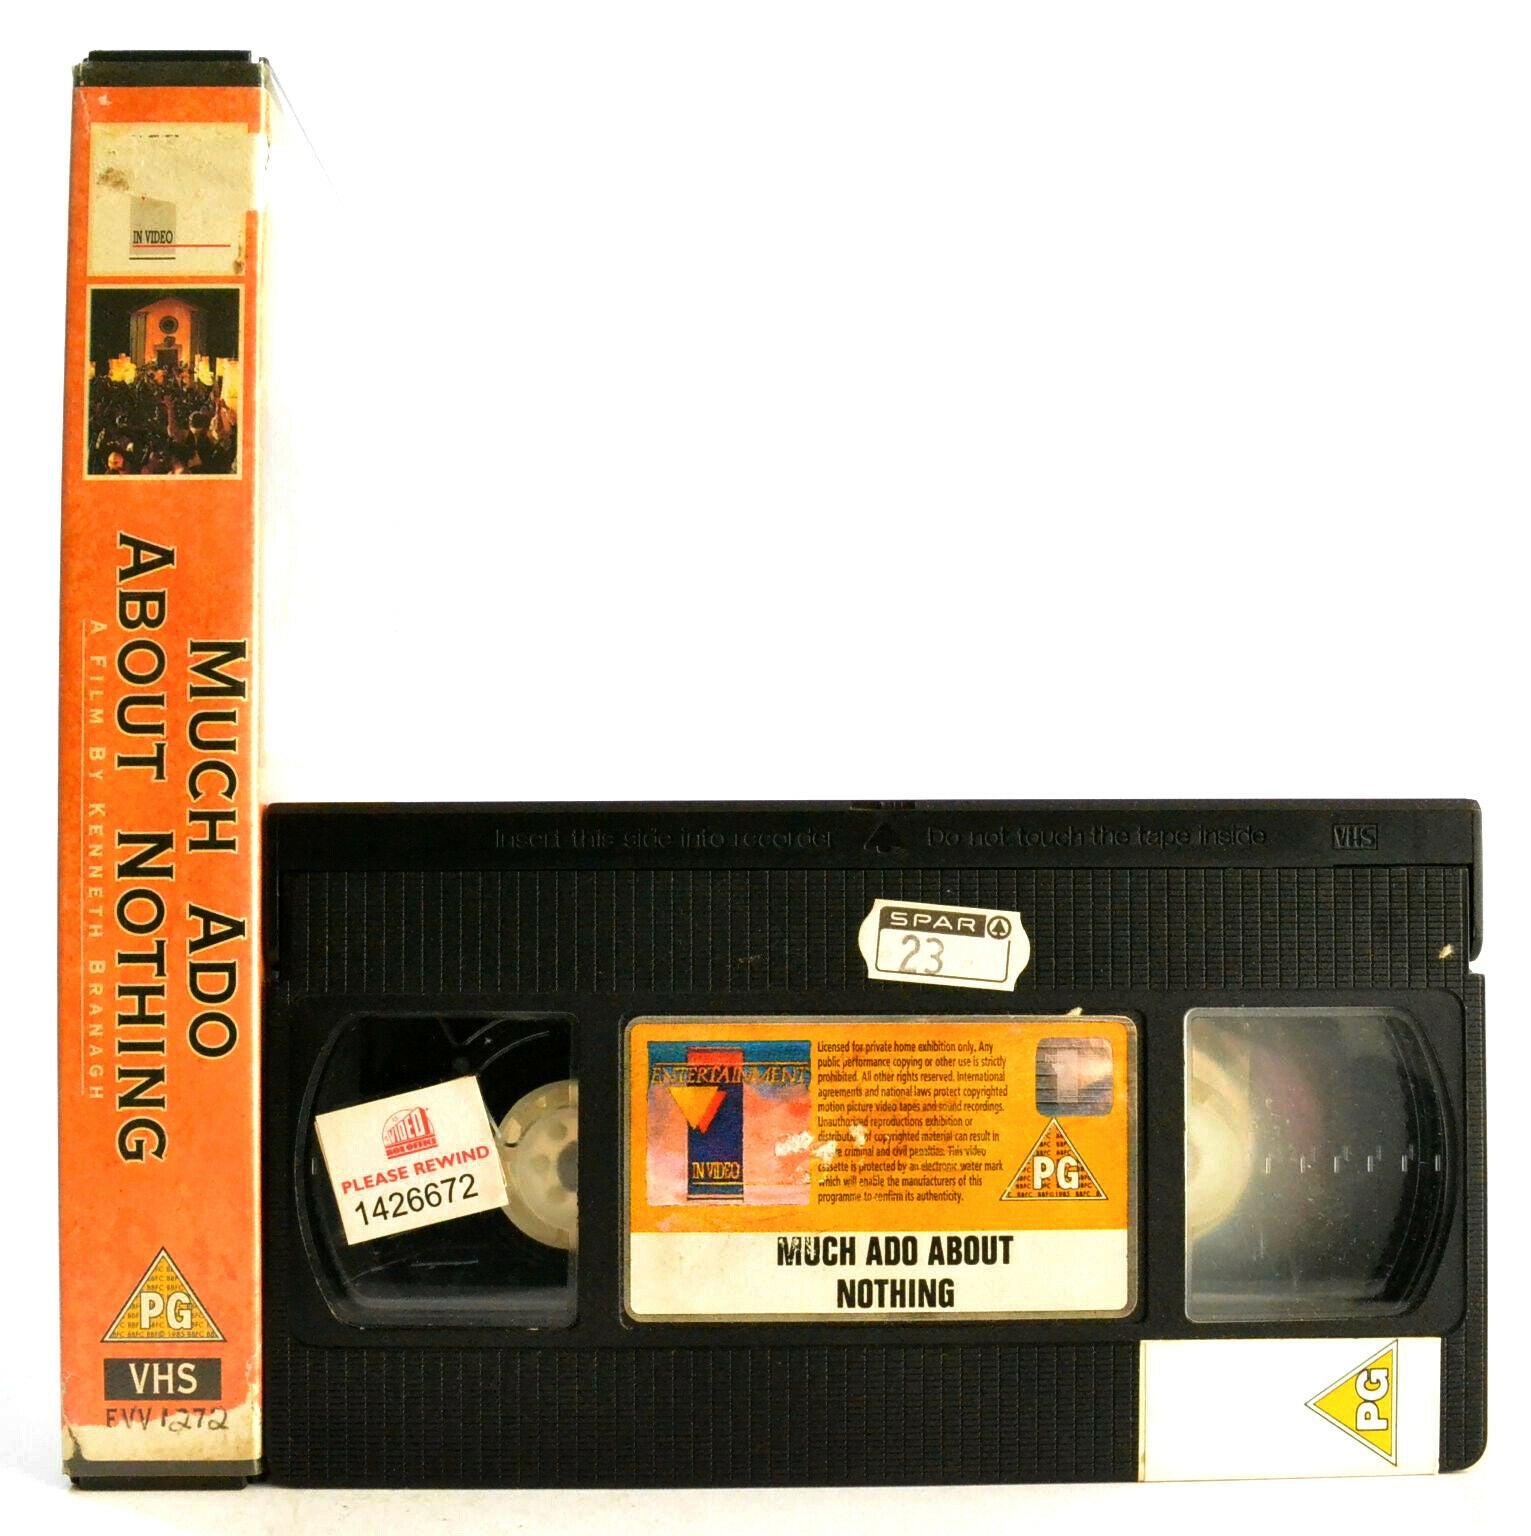 Much Ado About Nothing: Comedy/Love Story - By W.Shakespeare - Large Box - VHS-